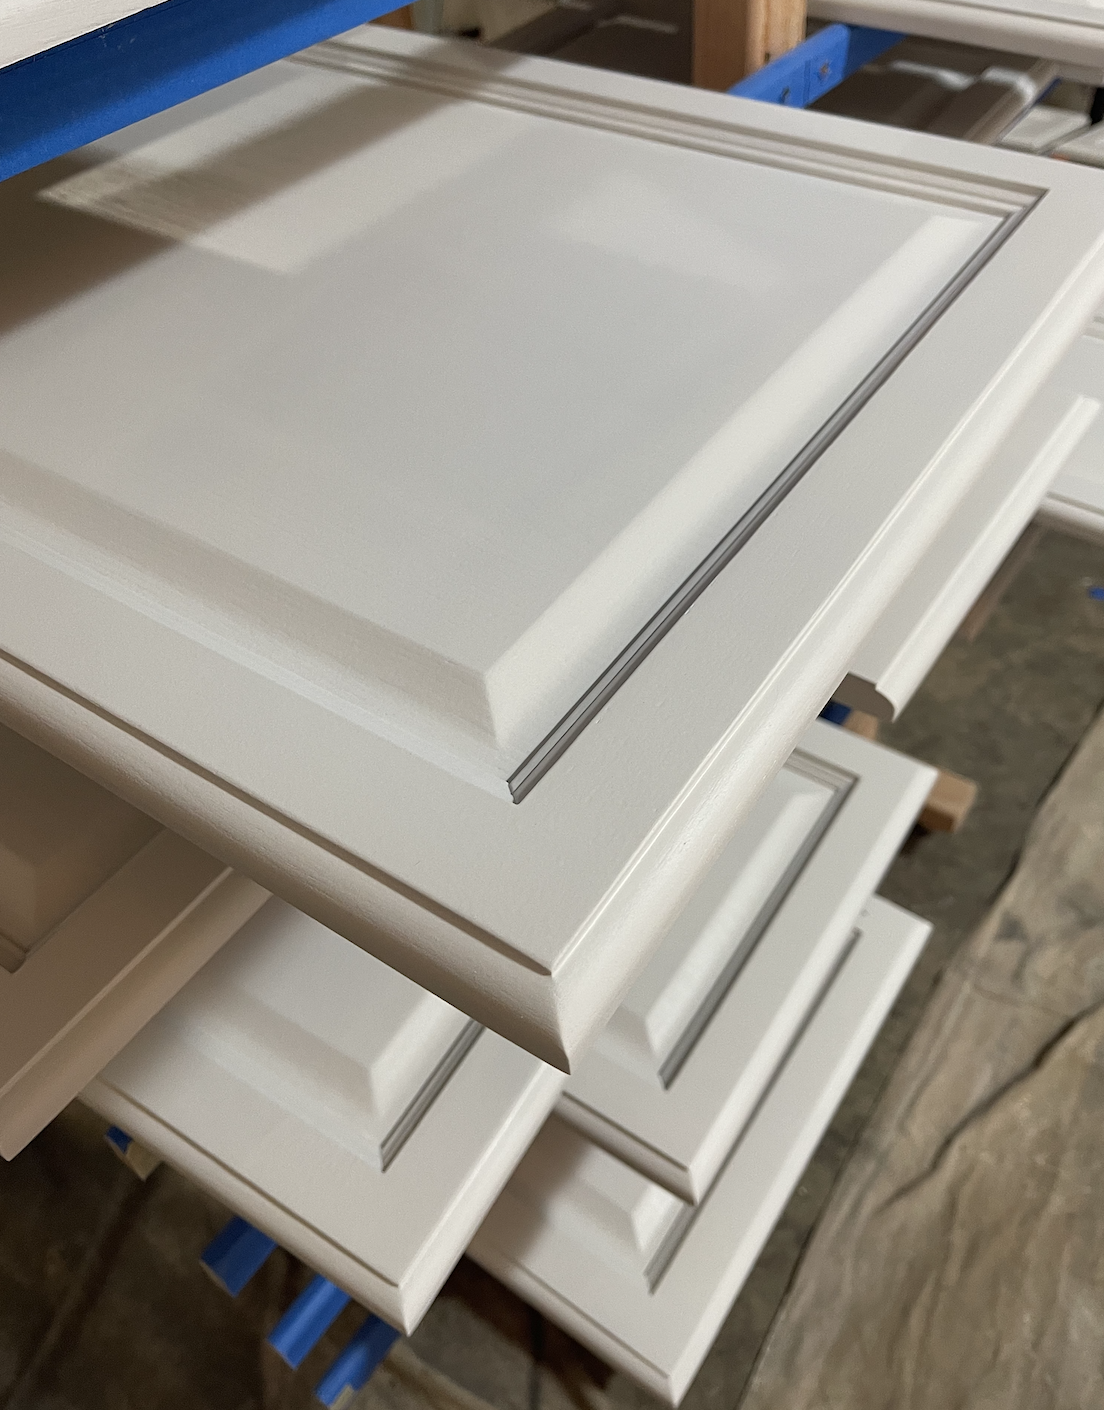 Customized Cabinet Door Spray Painting Services in Singapore (1)